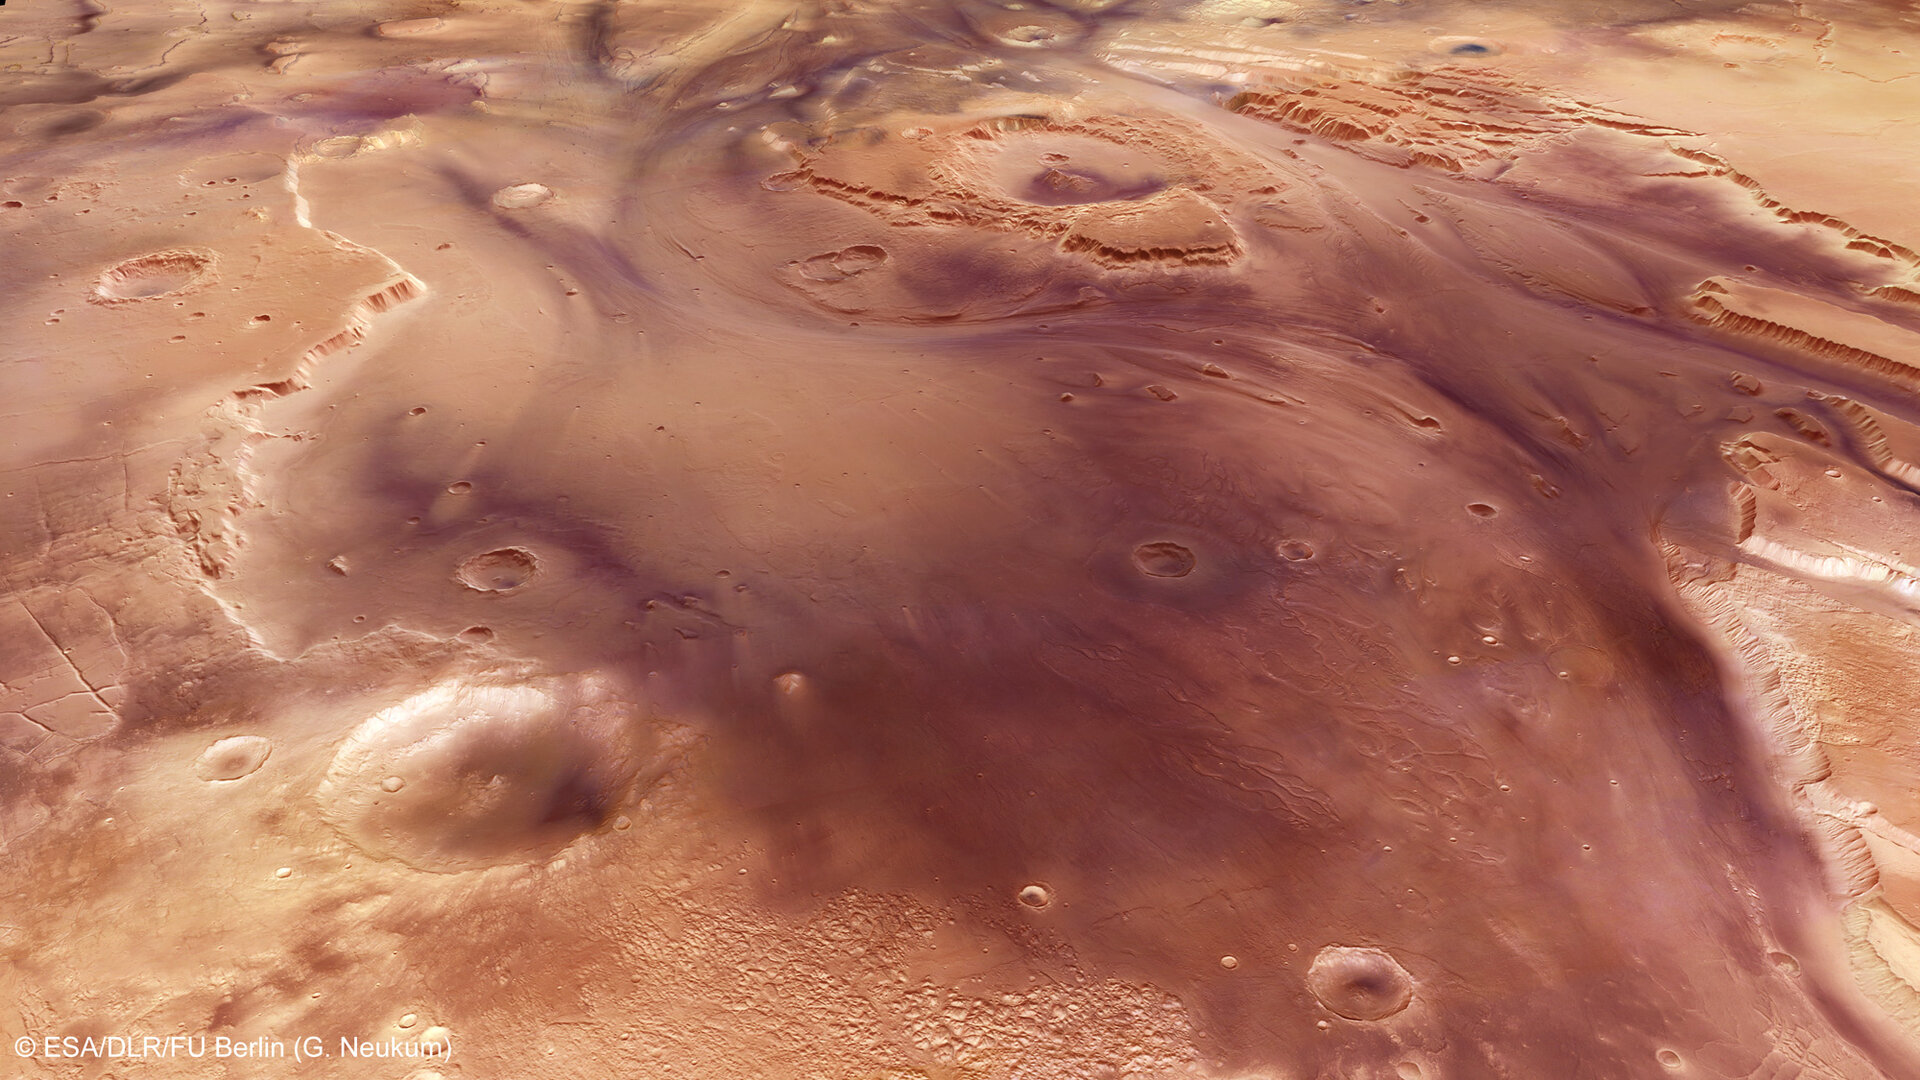 Perspective view of Kasei Valles